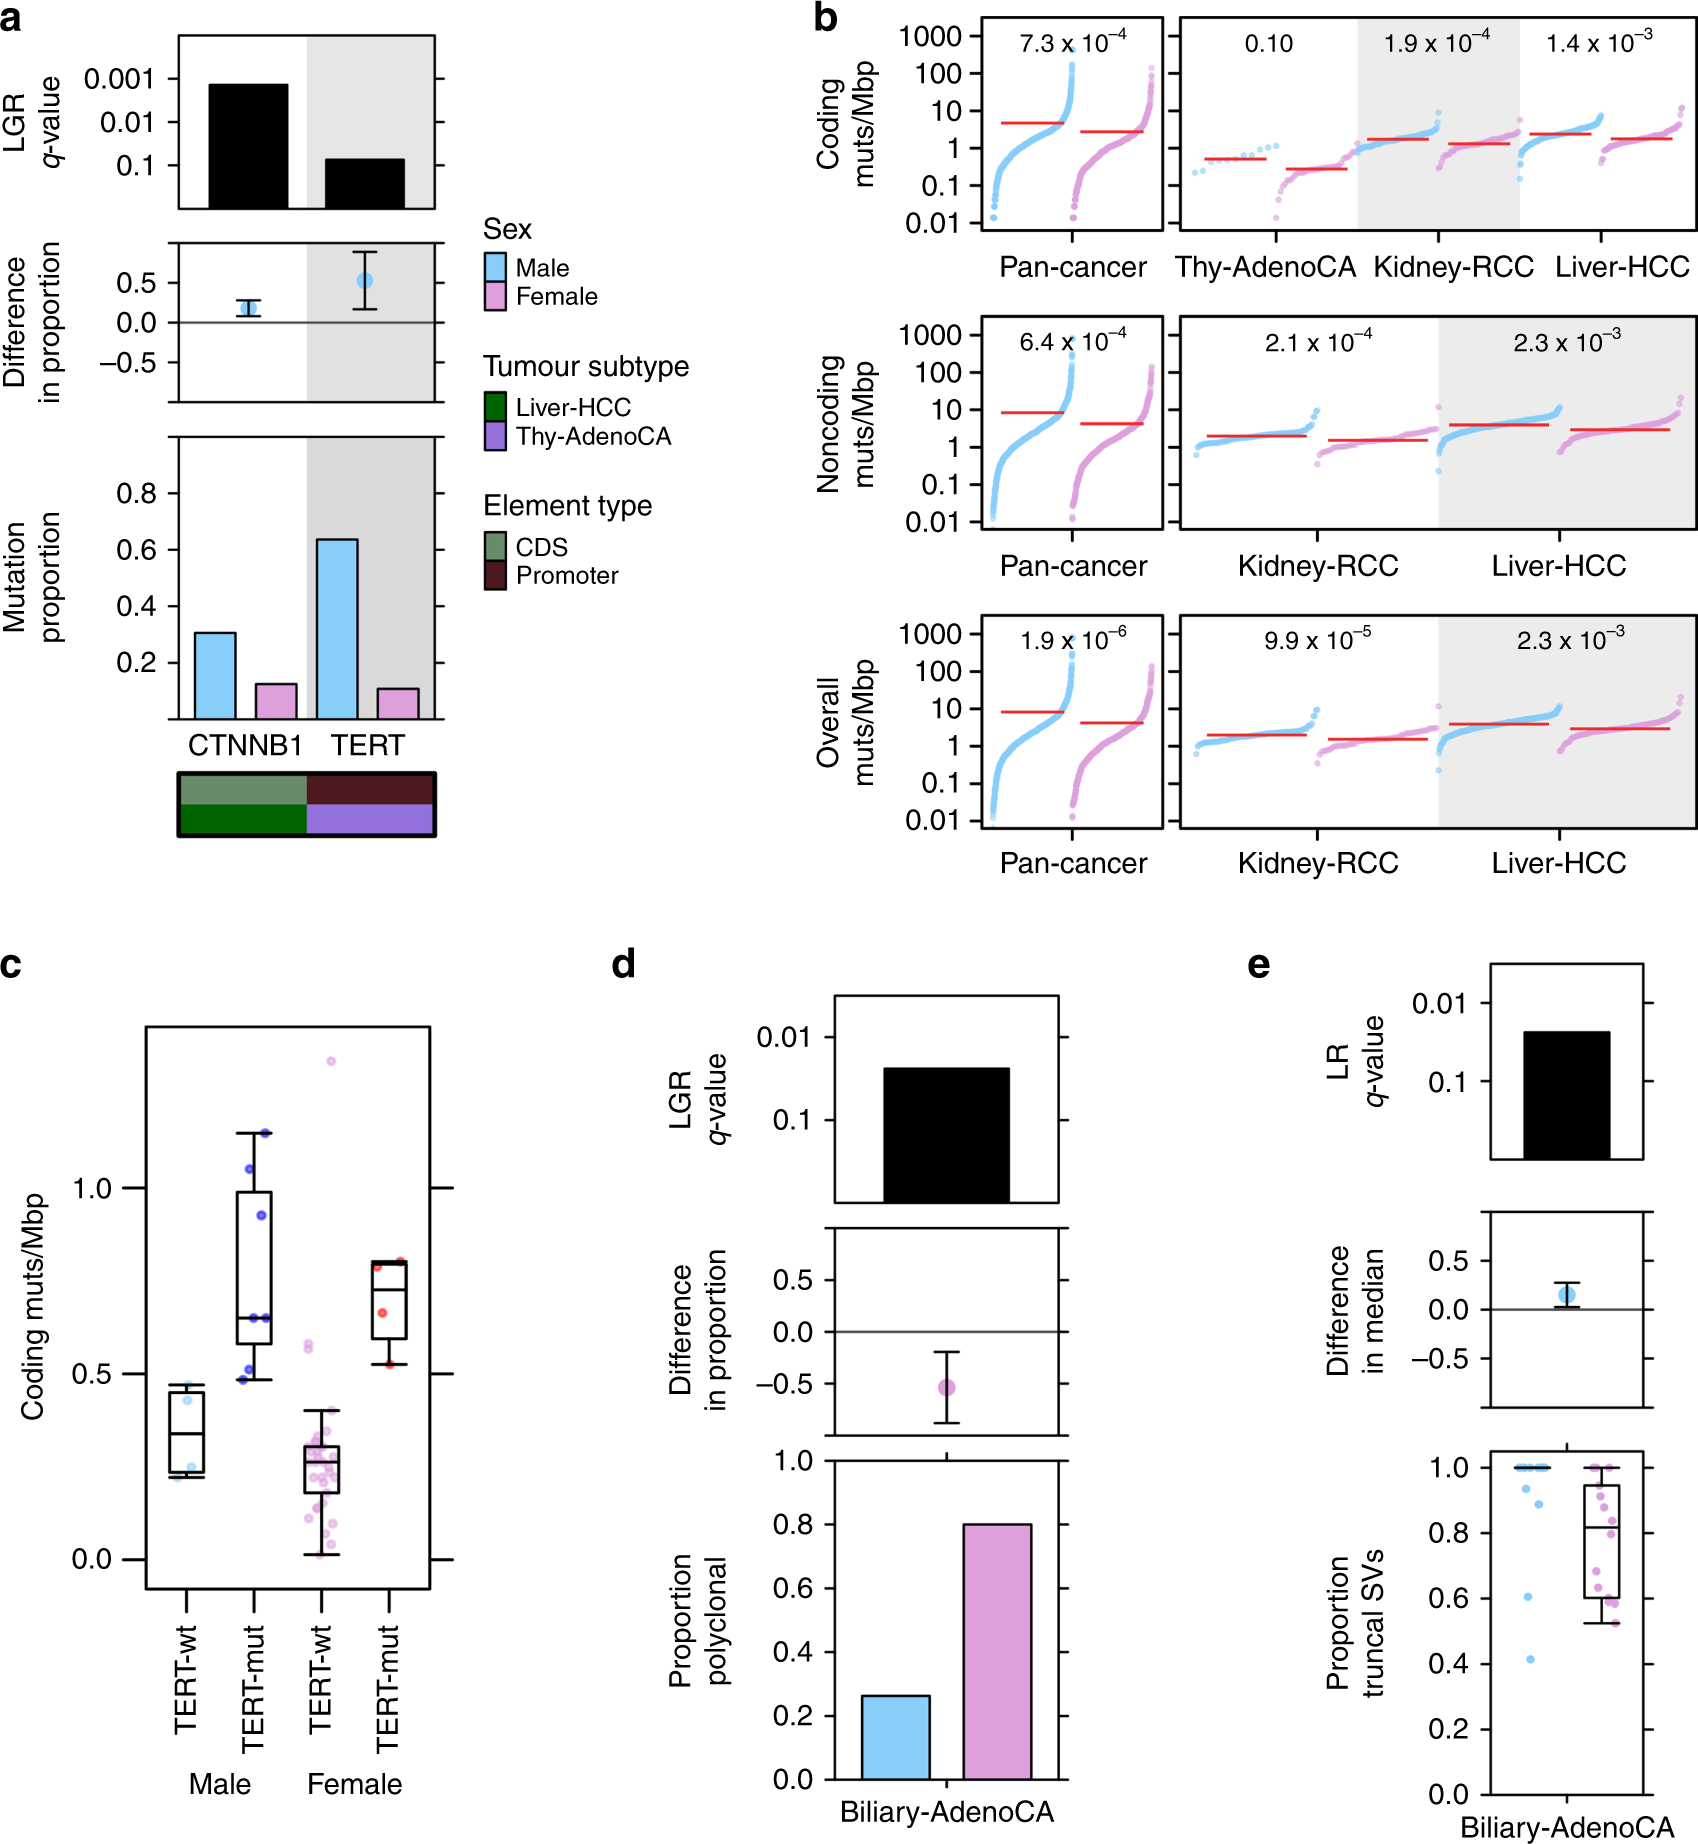 In Uc Browser Japani Sex Video - Sex differences in oncogenic mutational processes | Nature Communications